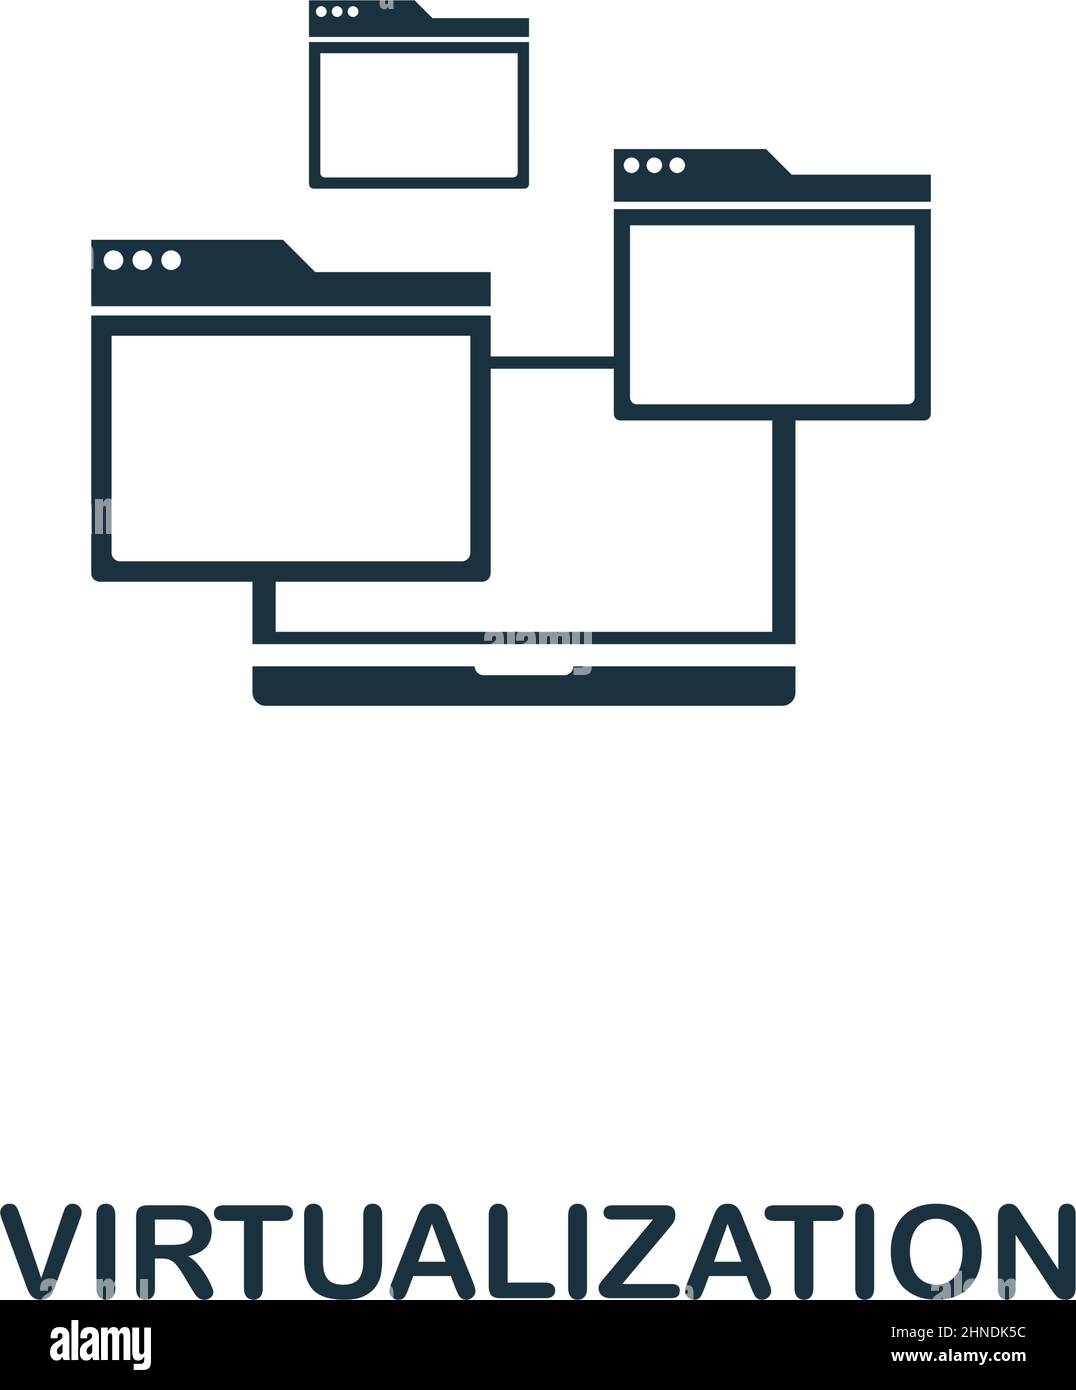 Virtualization icon. Premium style design from web hosting icon collection. Pixel perfect Virtualization icon for web design, apps, software, print Stock Vector